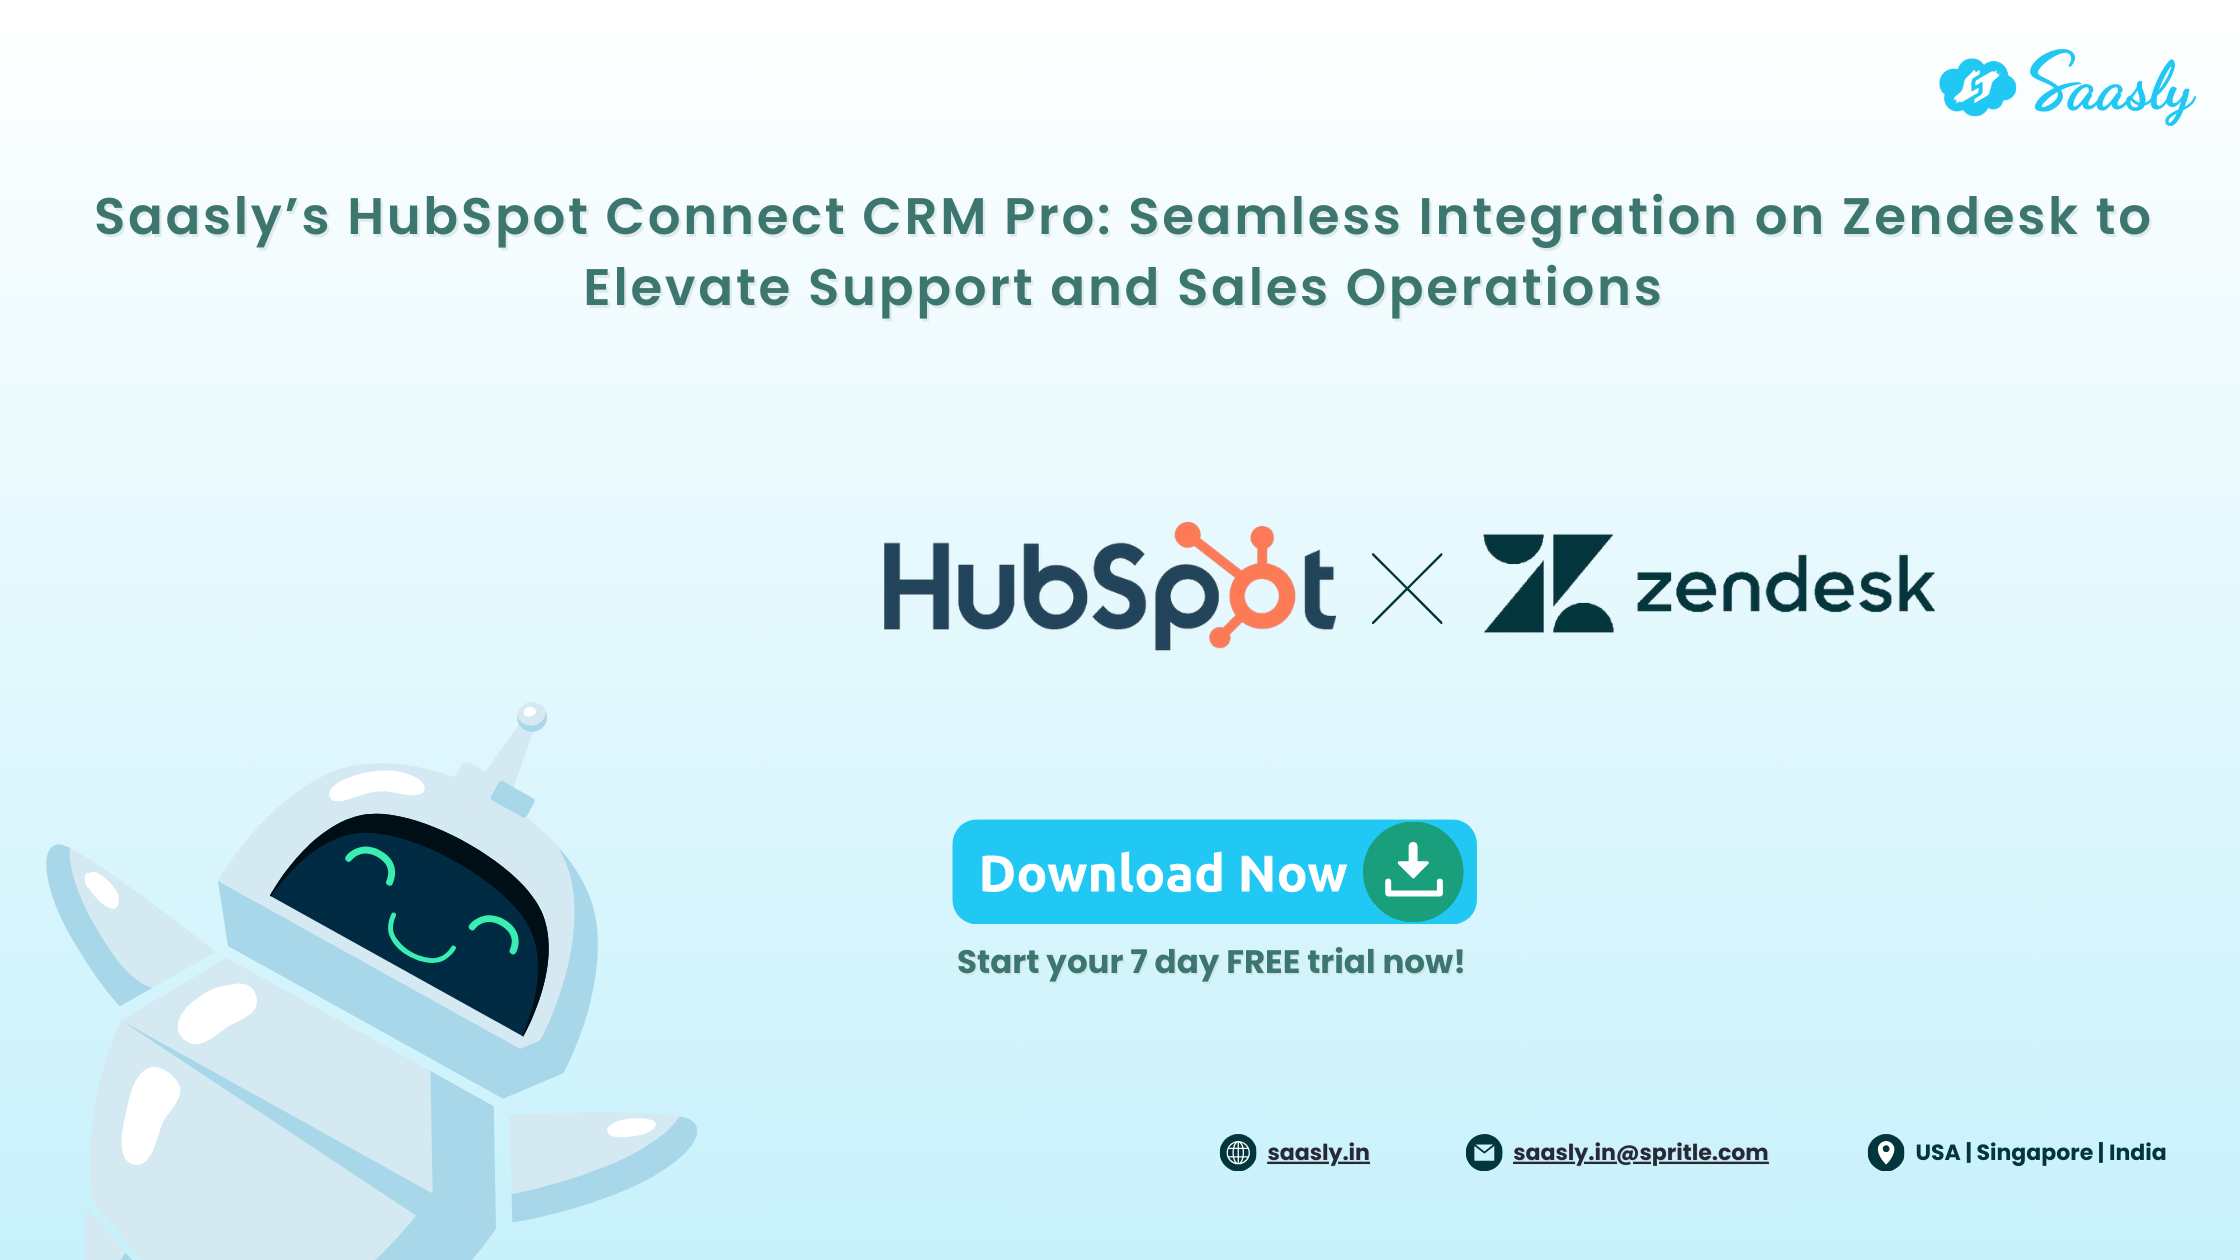 Saasly’s  HubSpot CRM Connect Pro: Seamless Integration on Zendesk to Elevate Support and Sales Operations